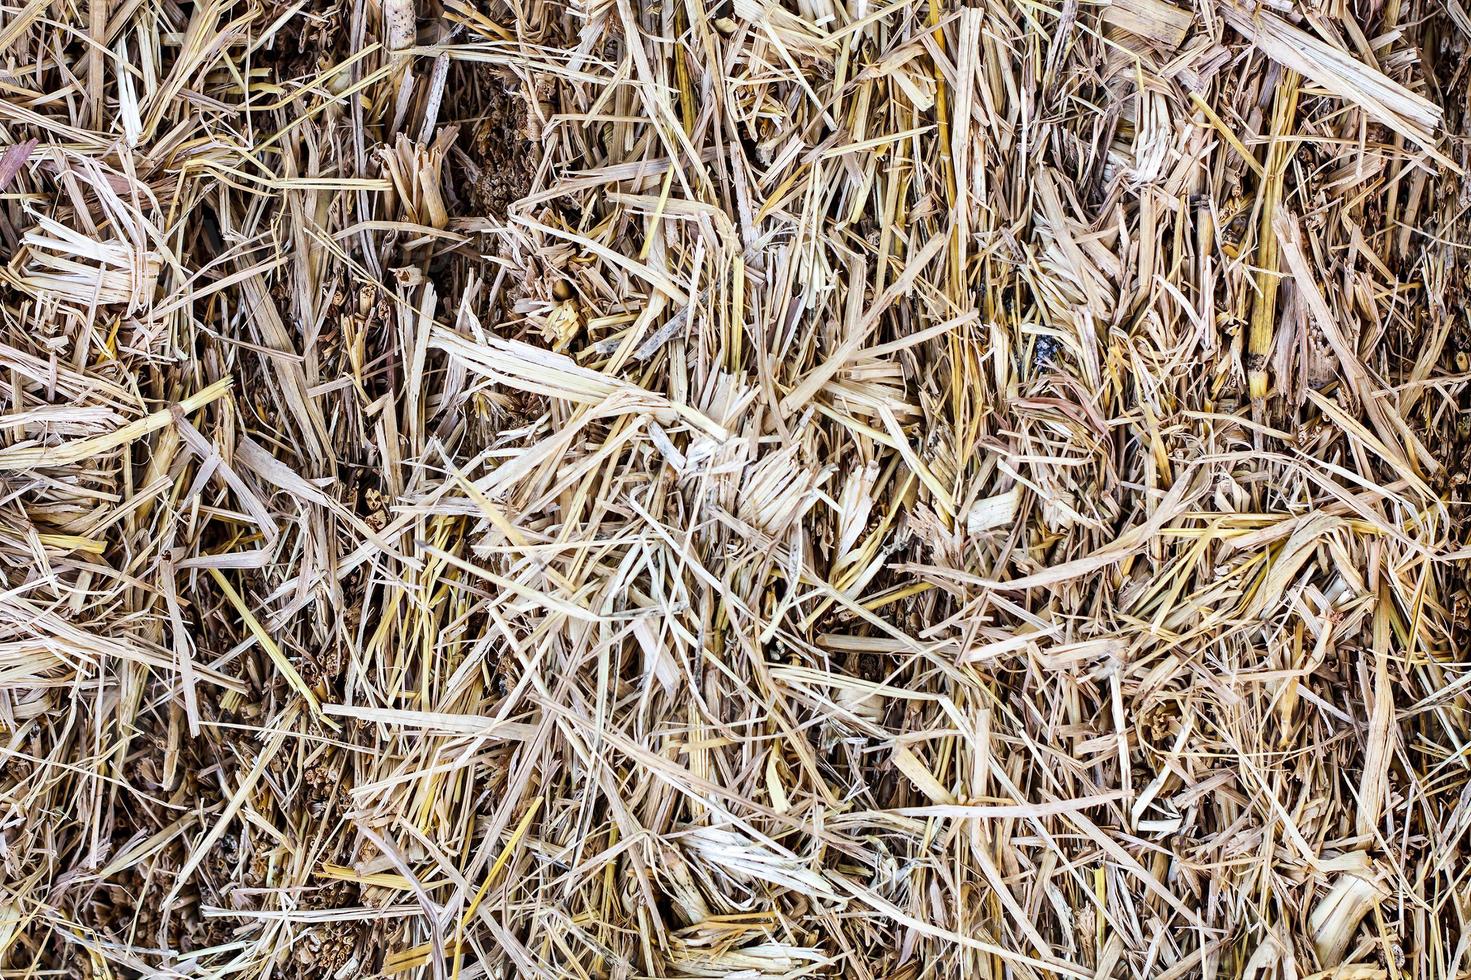 Messy Thatch close up photo